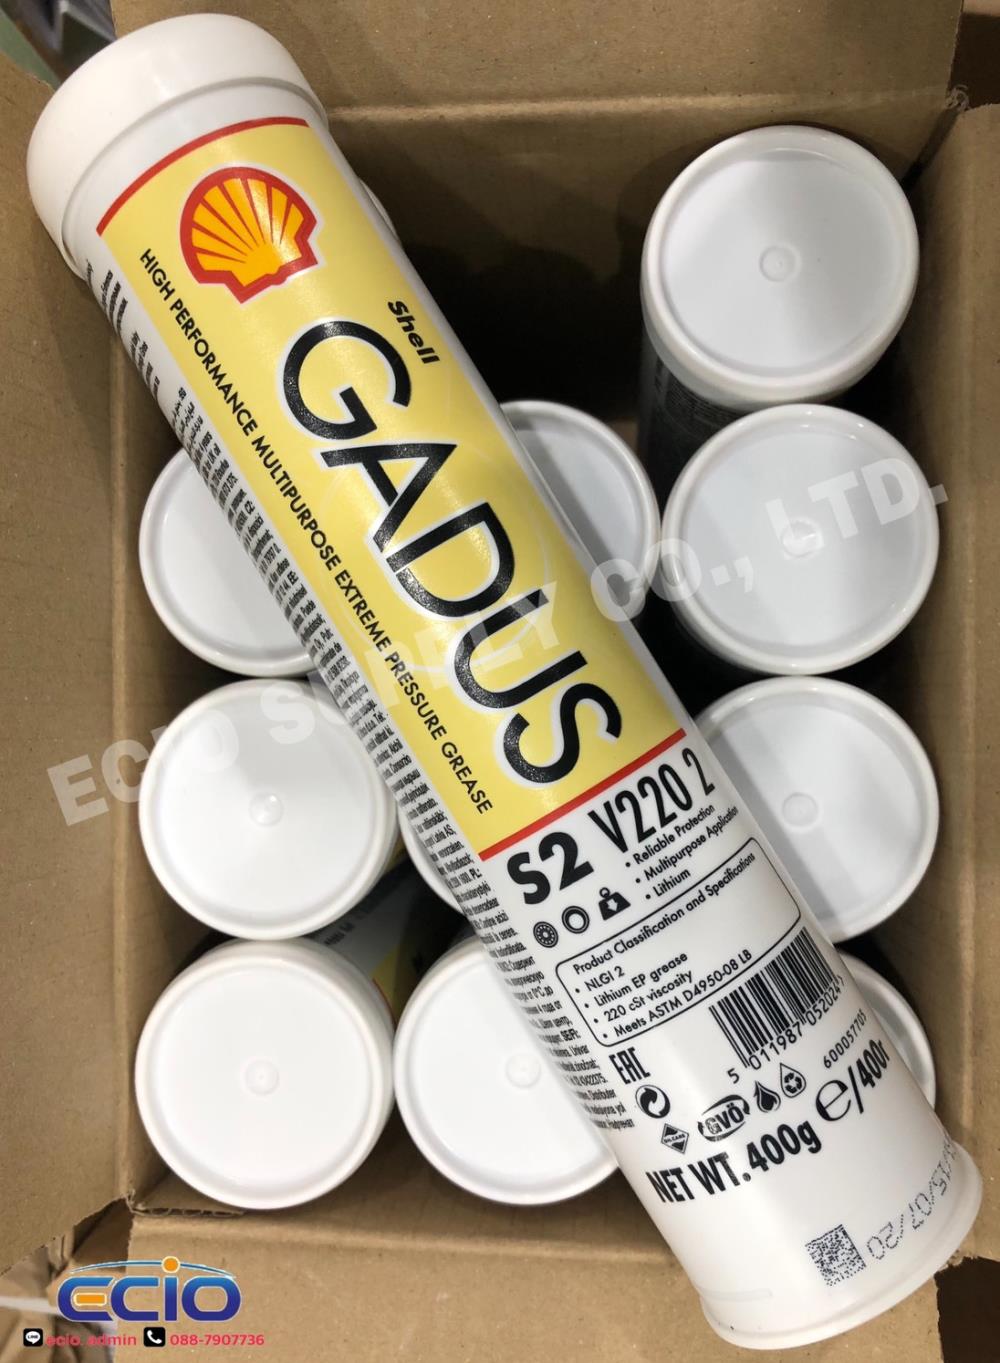 Grease, SHELL GADUS S2 V220 2 400g.